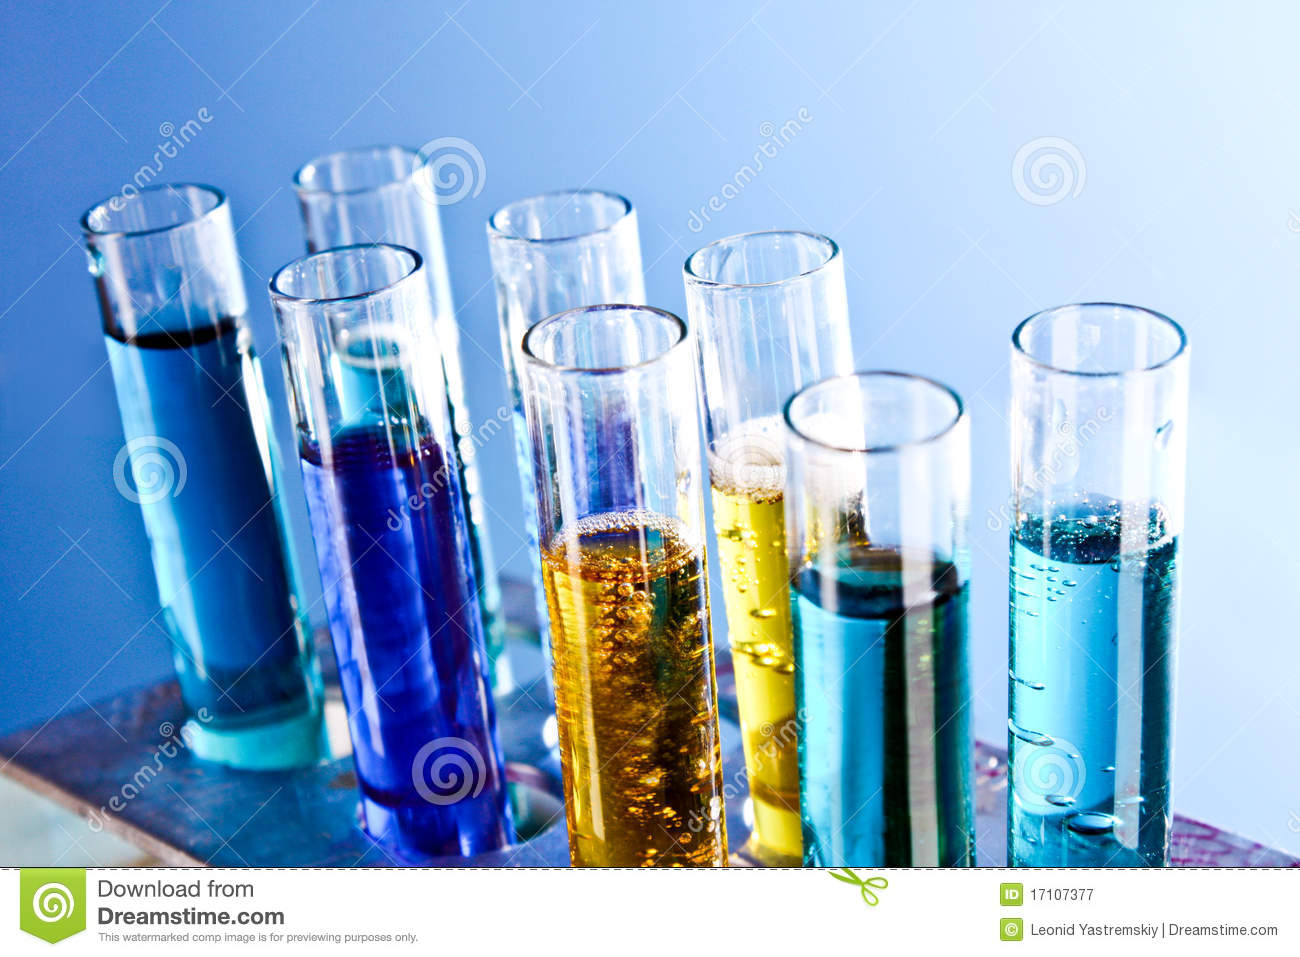 Free Images Test Tubes